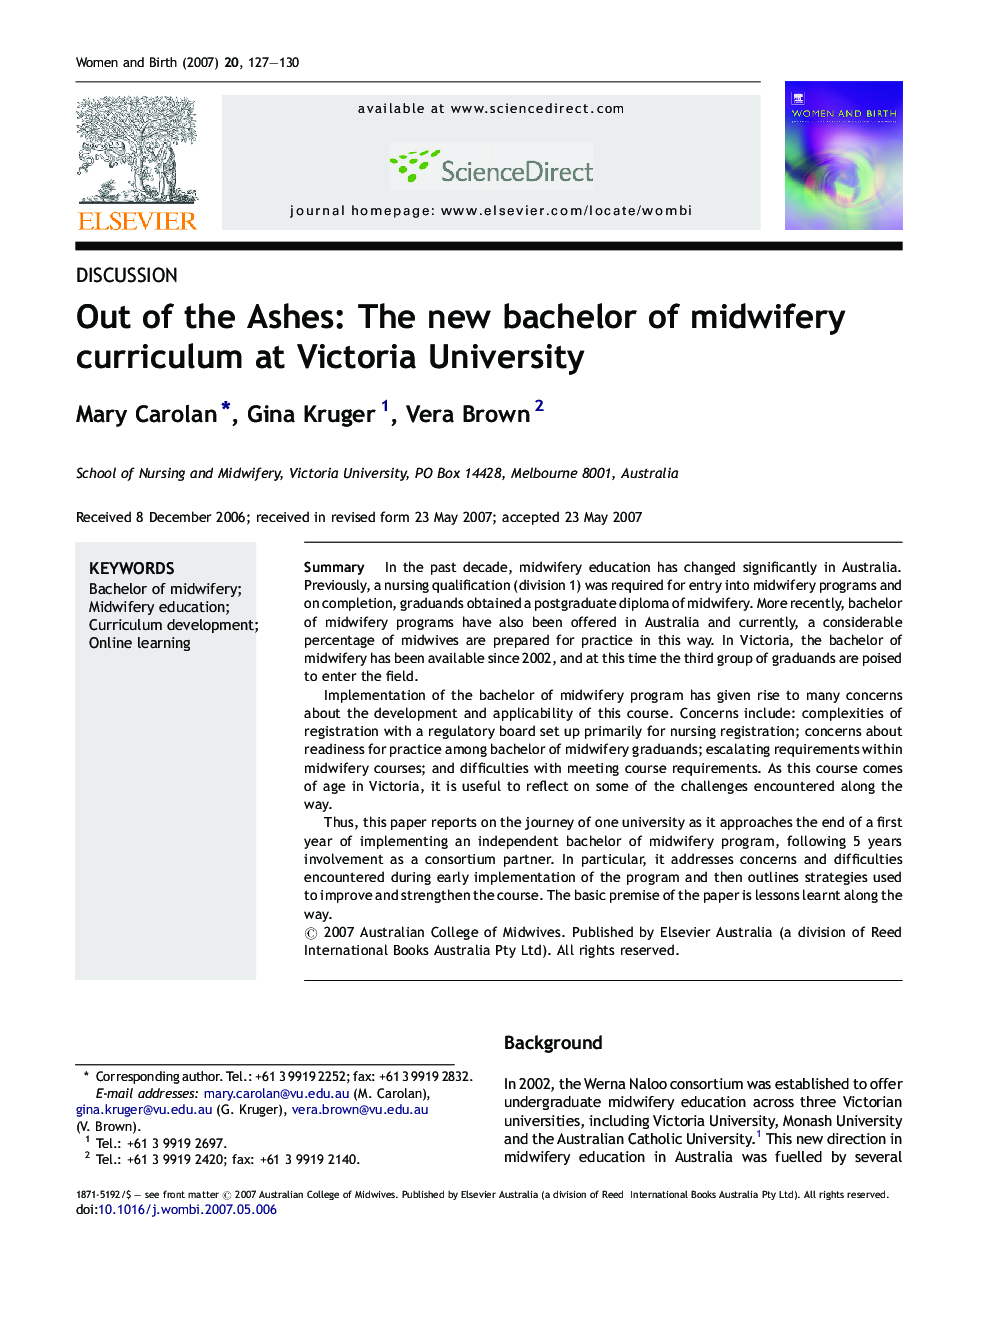 Out of the Ashes: The new bachelor of midwifery curriculum at Victoria University